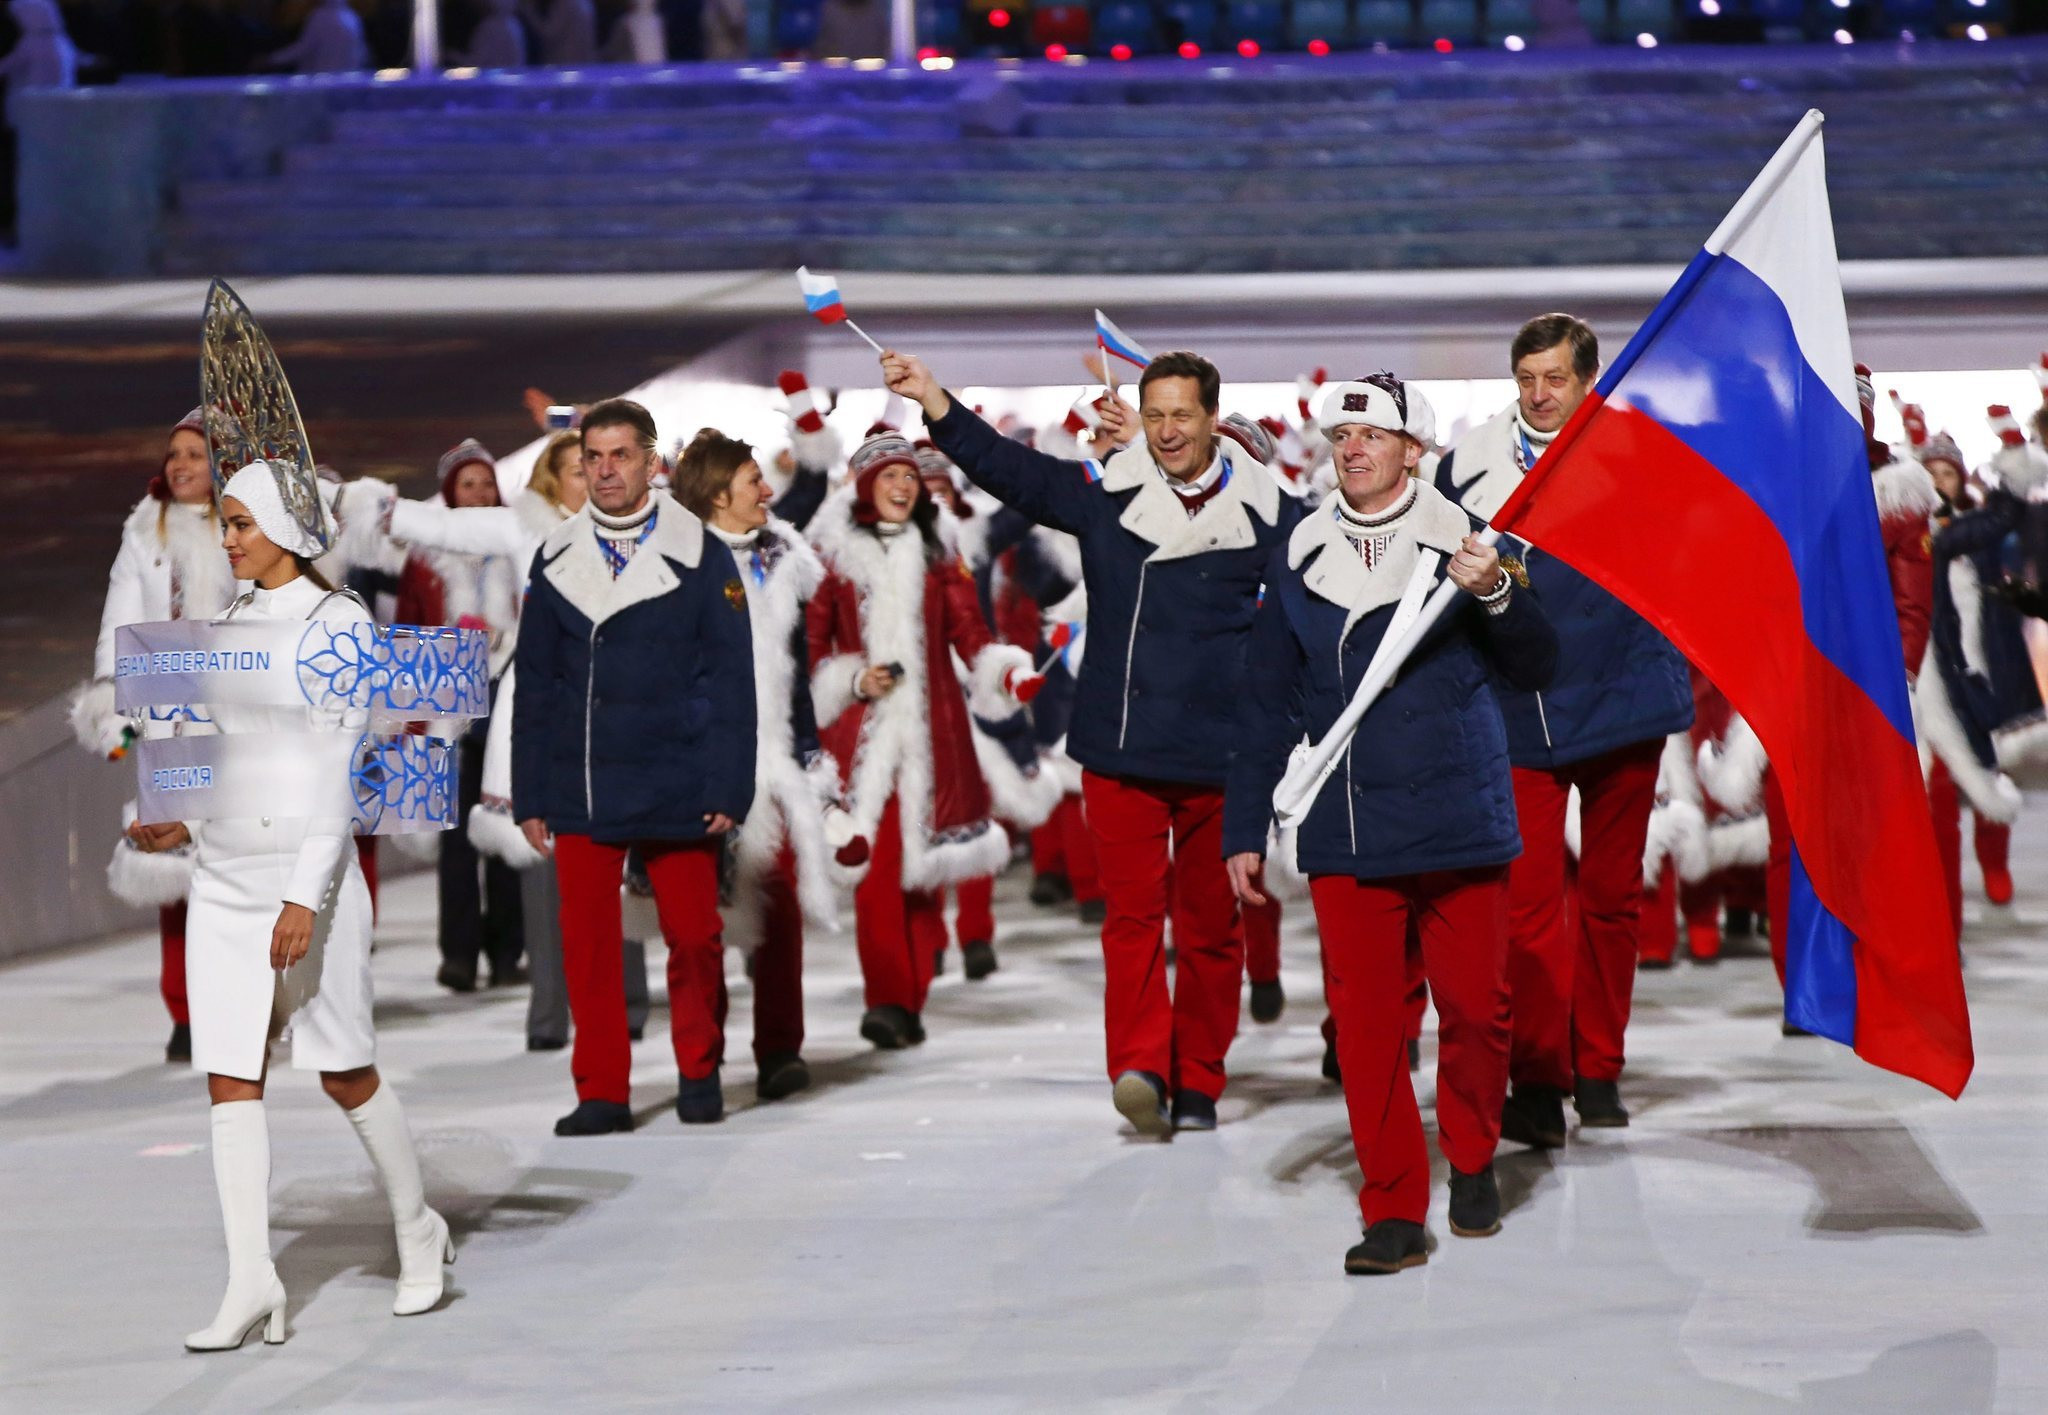 Russia will not be able to compete under their own flag at Pyeongchang 2018 ©Getty Images